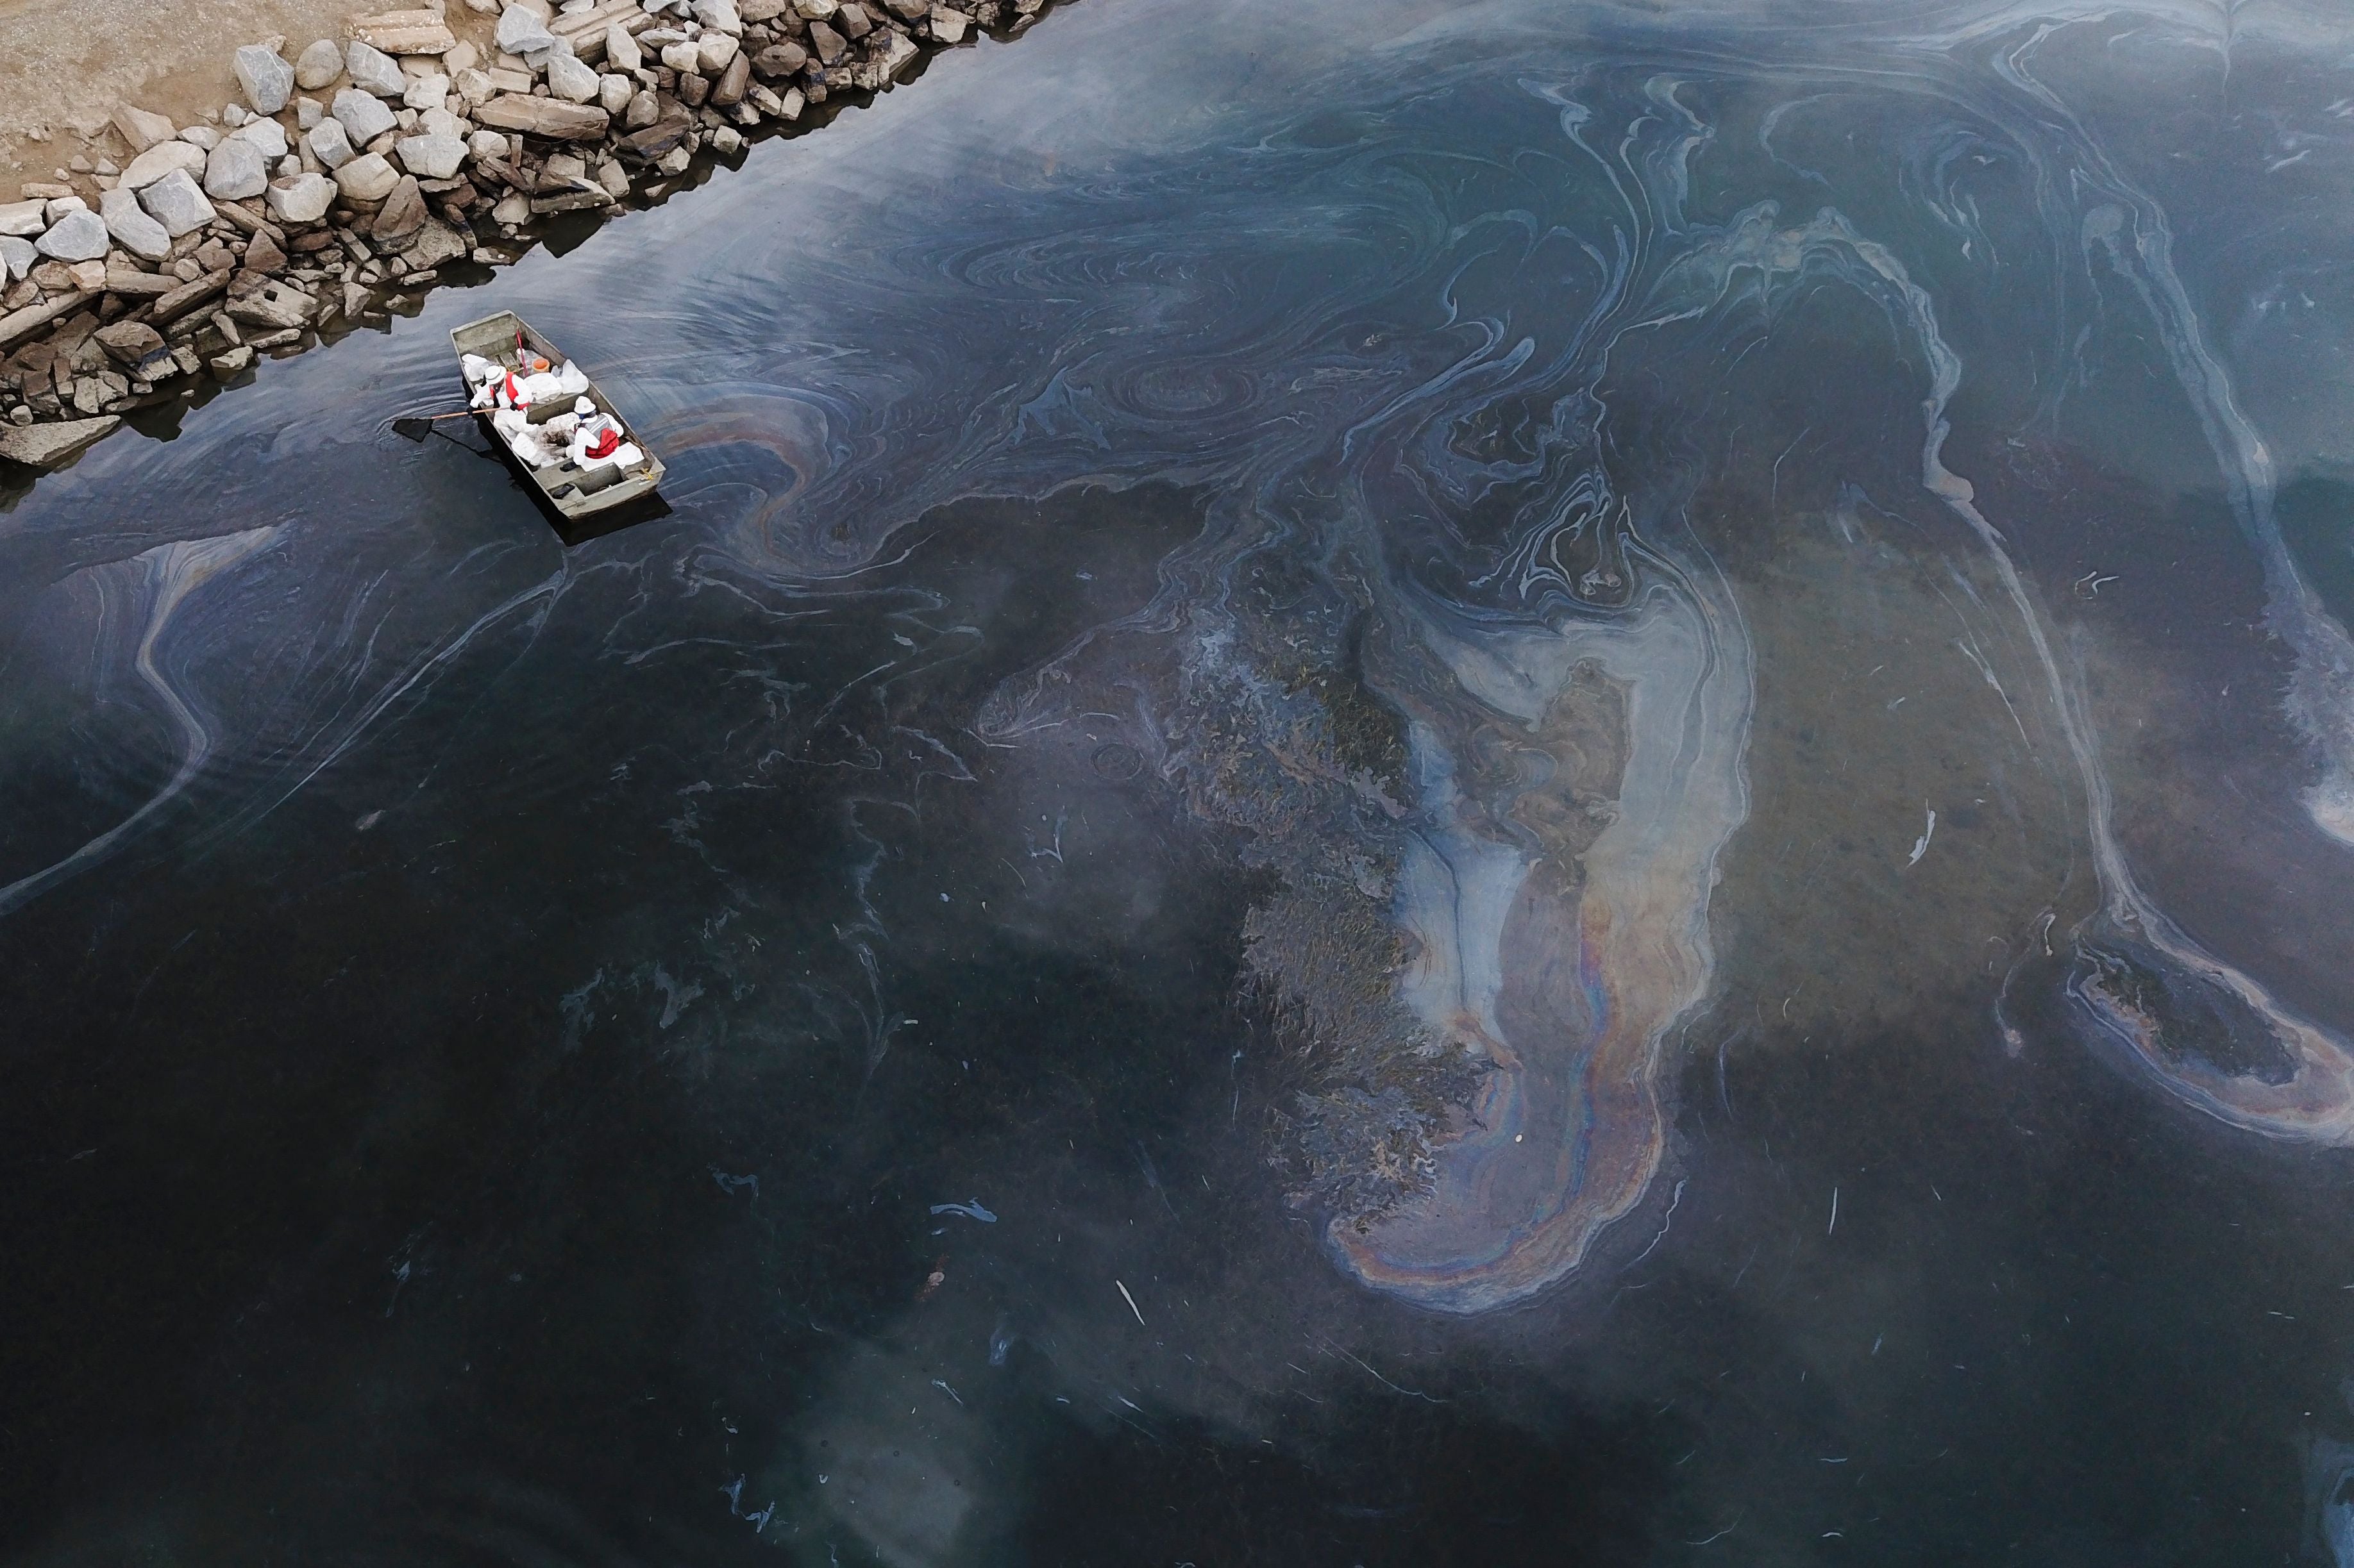 This aerial picture taken on October 4, 2021 shows environmental response crews cleaning up oil that flowed near the Talbert marsh and Santa Ana River mouth, creating a sheen on the water after an oil spill in the Pacific Ocean in Huntington Beach, California.